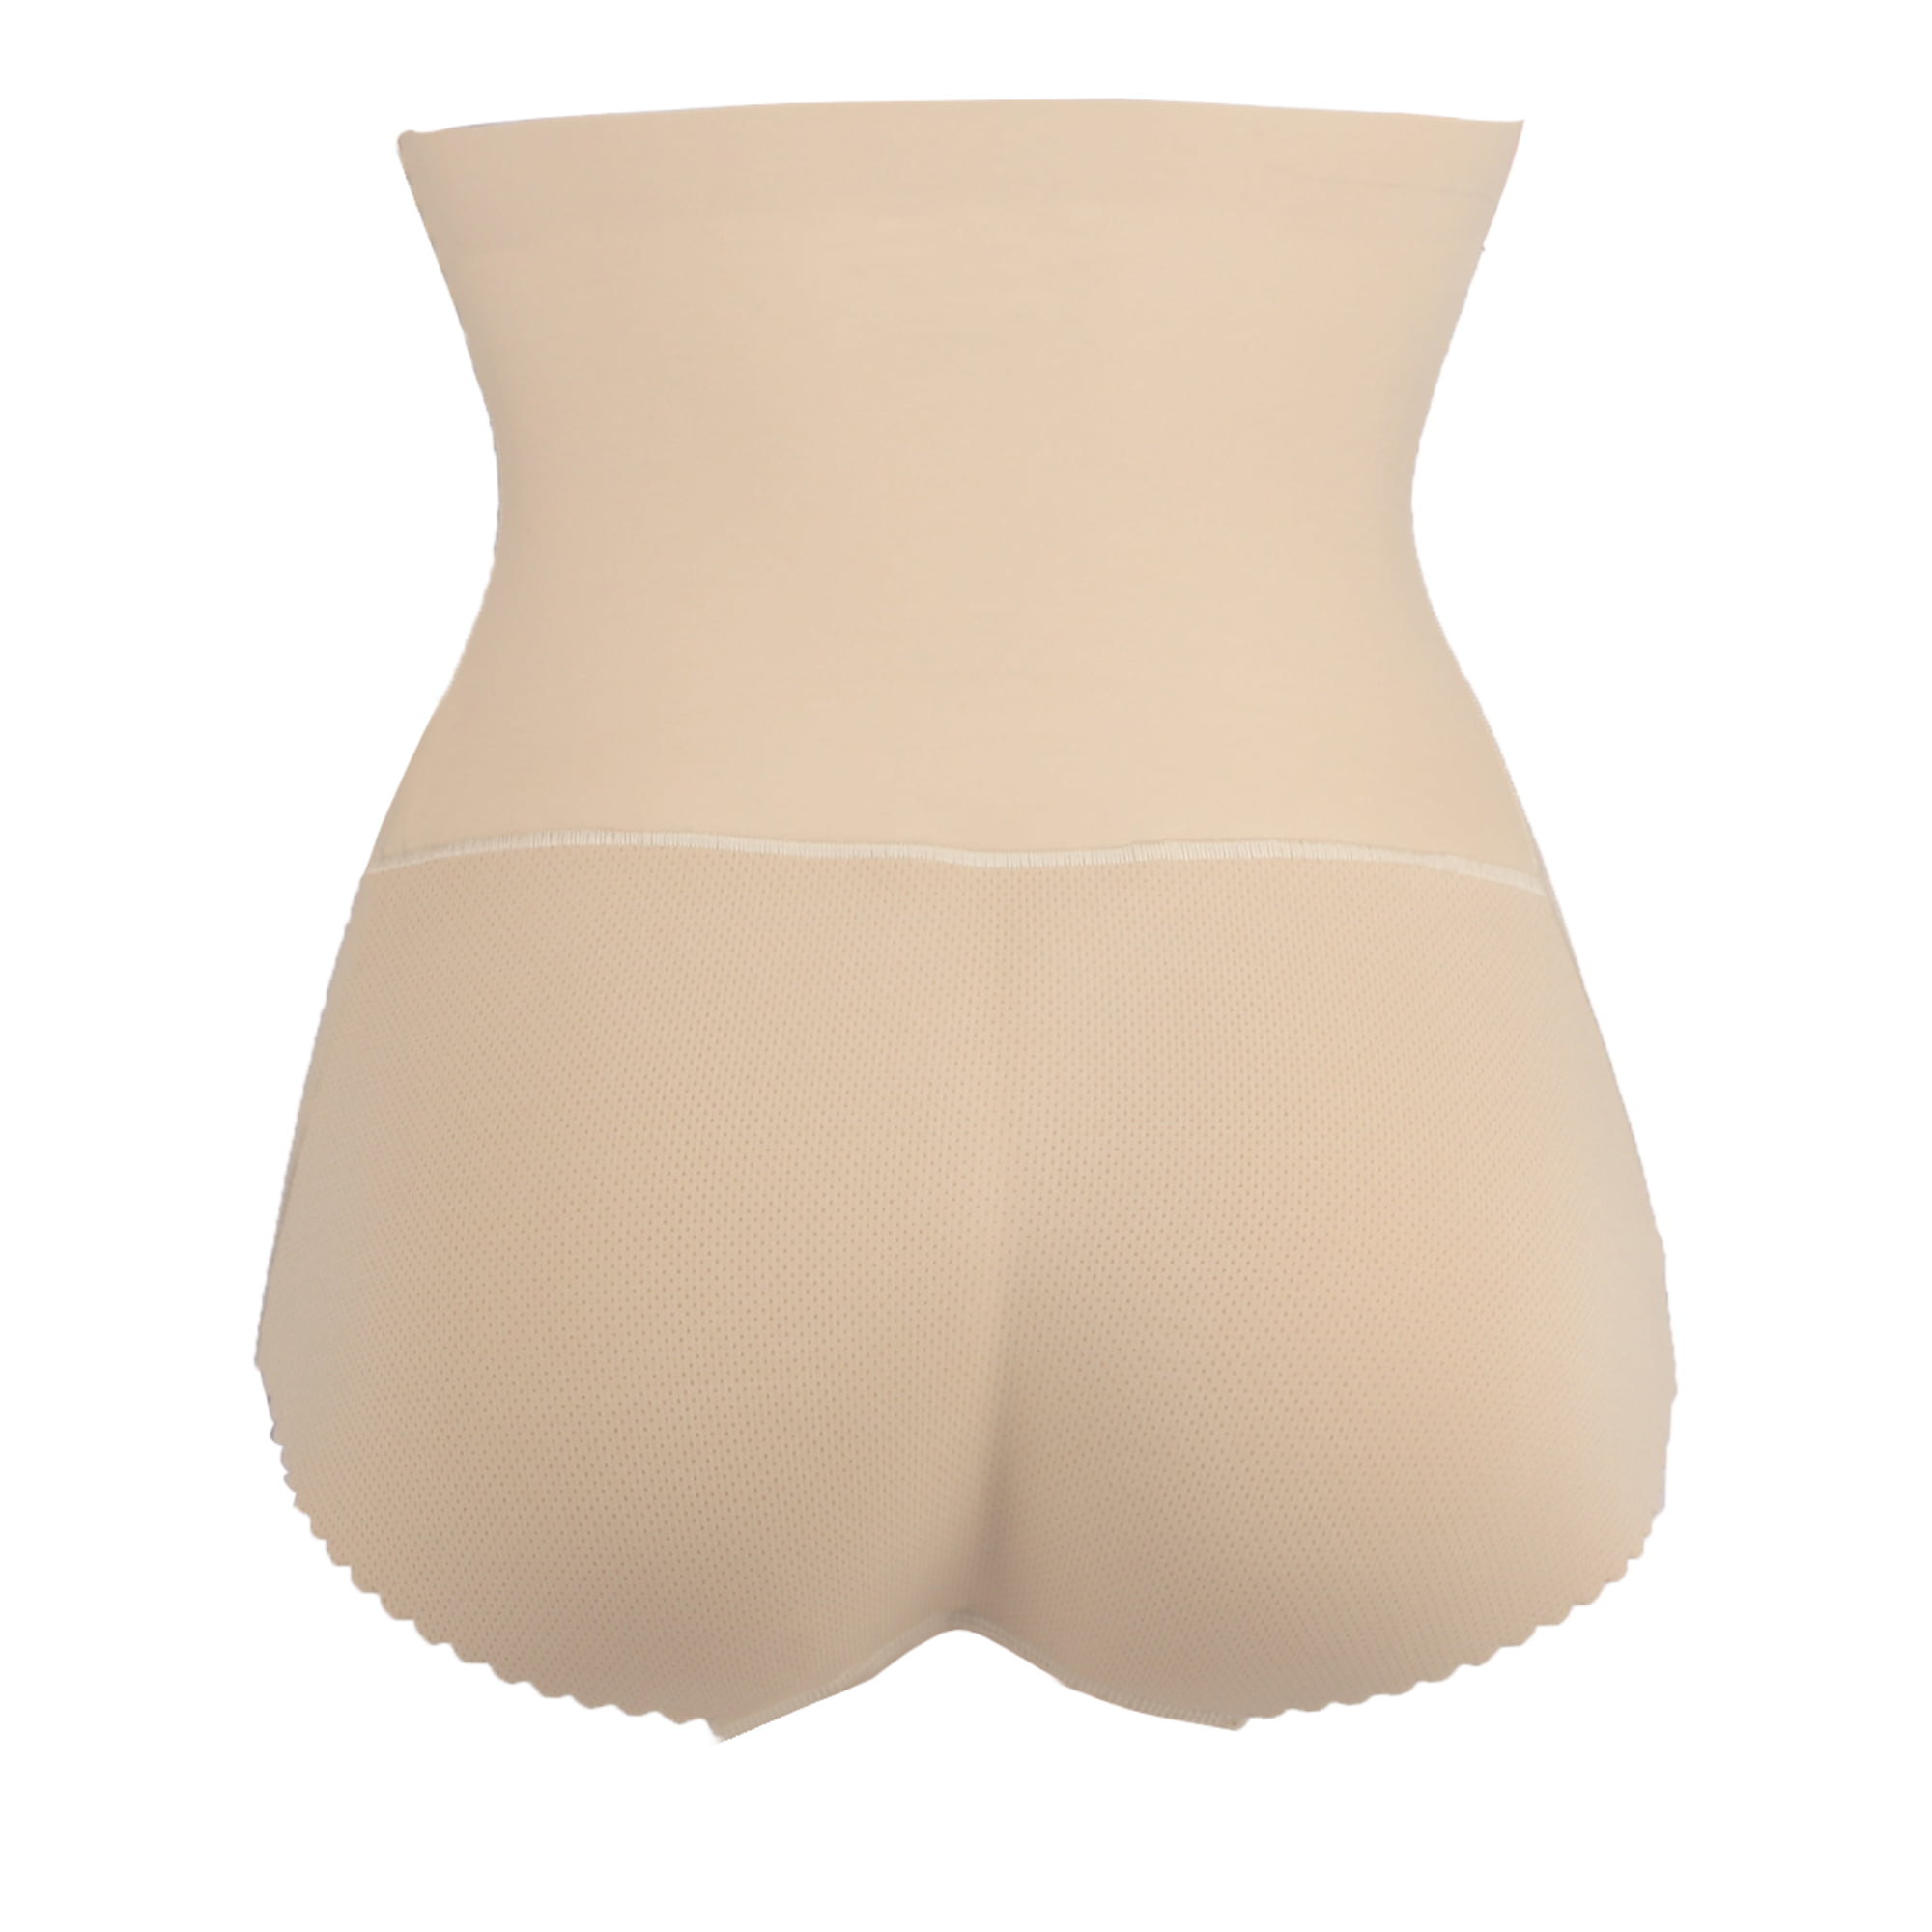 Sporty High Waist Trainer Scrunch Lift Up Panty For Women Sexy Butt Raiser,  Control Pant For Autumn/Winter L220802 From Sihuai10, $16.65